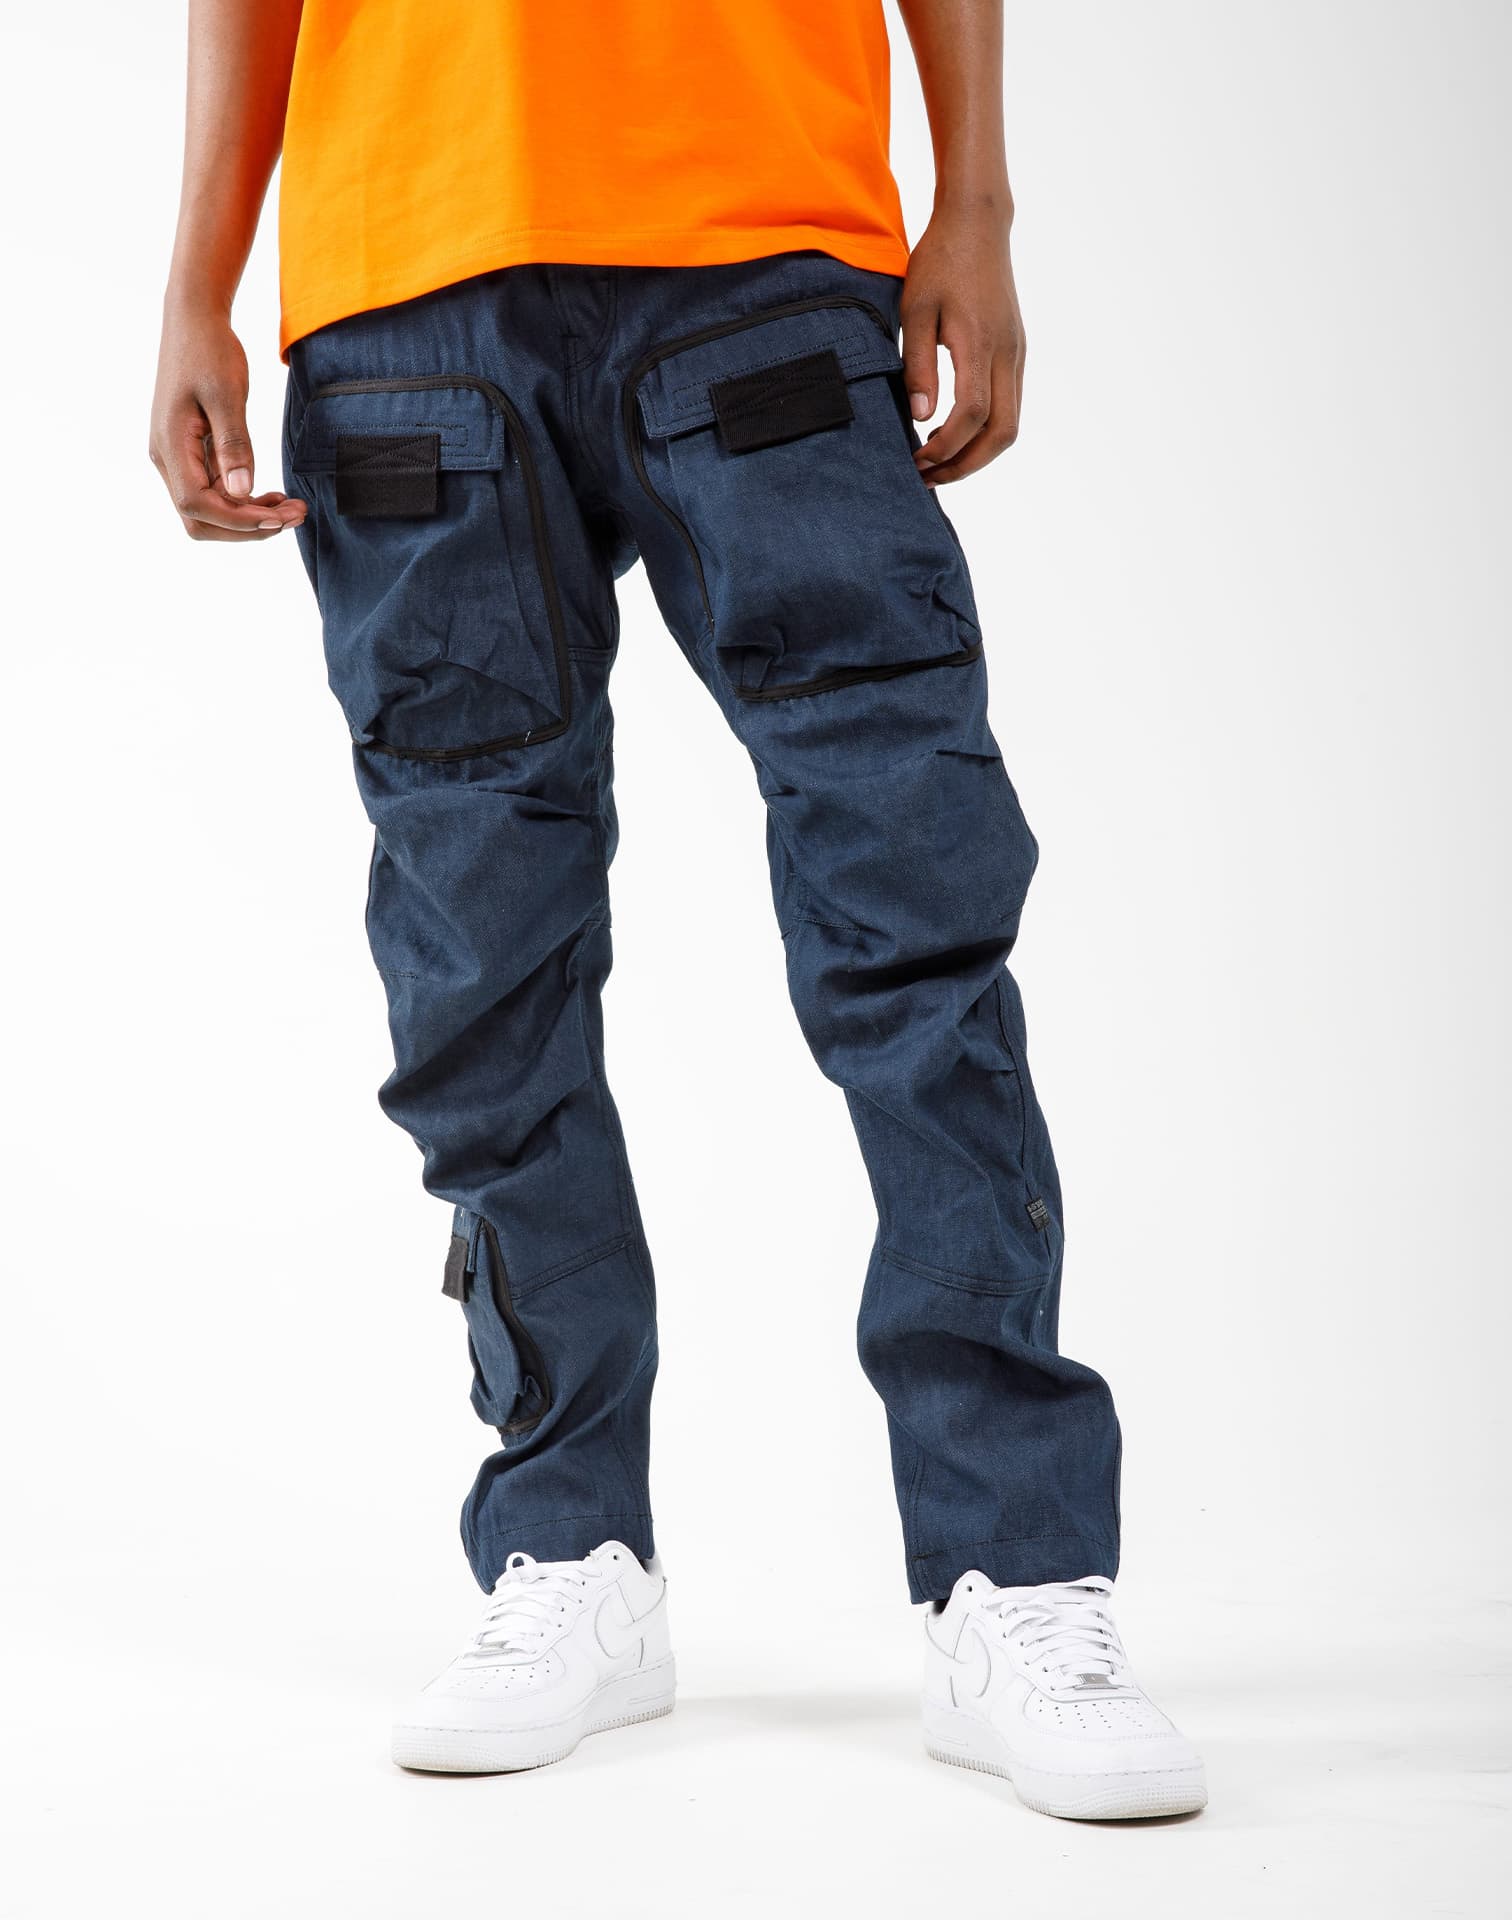 G-STAR Roxic Straight Tapered Cargo Pant 'Mazarine' – Route66.co.nz